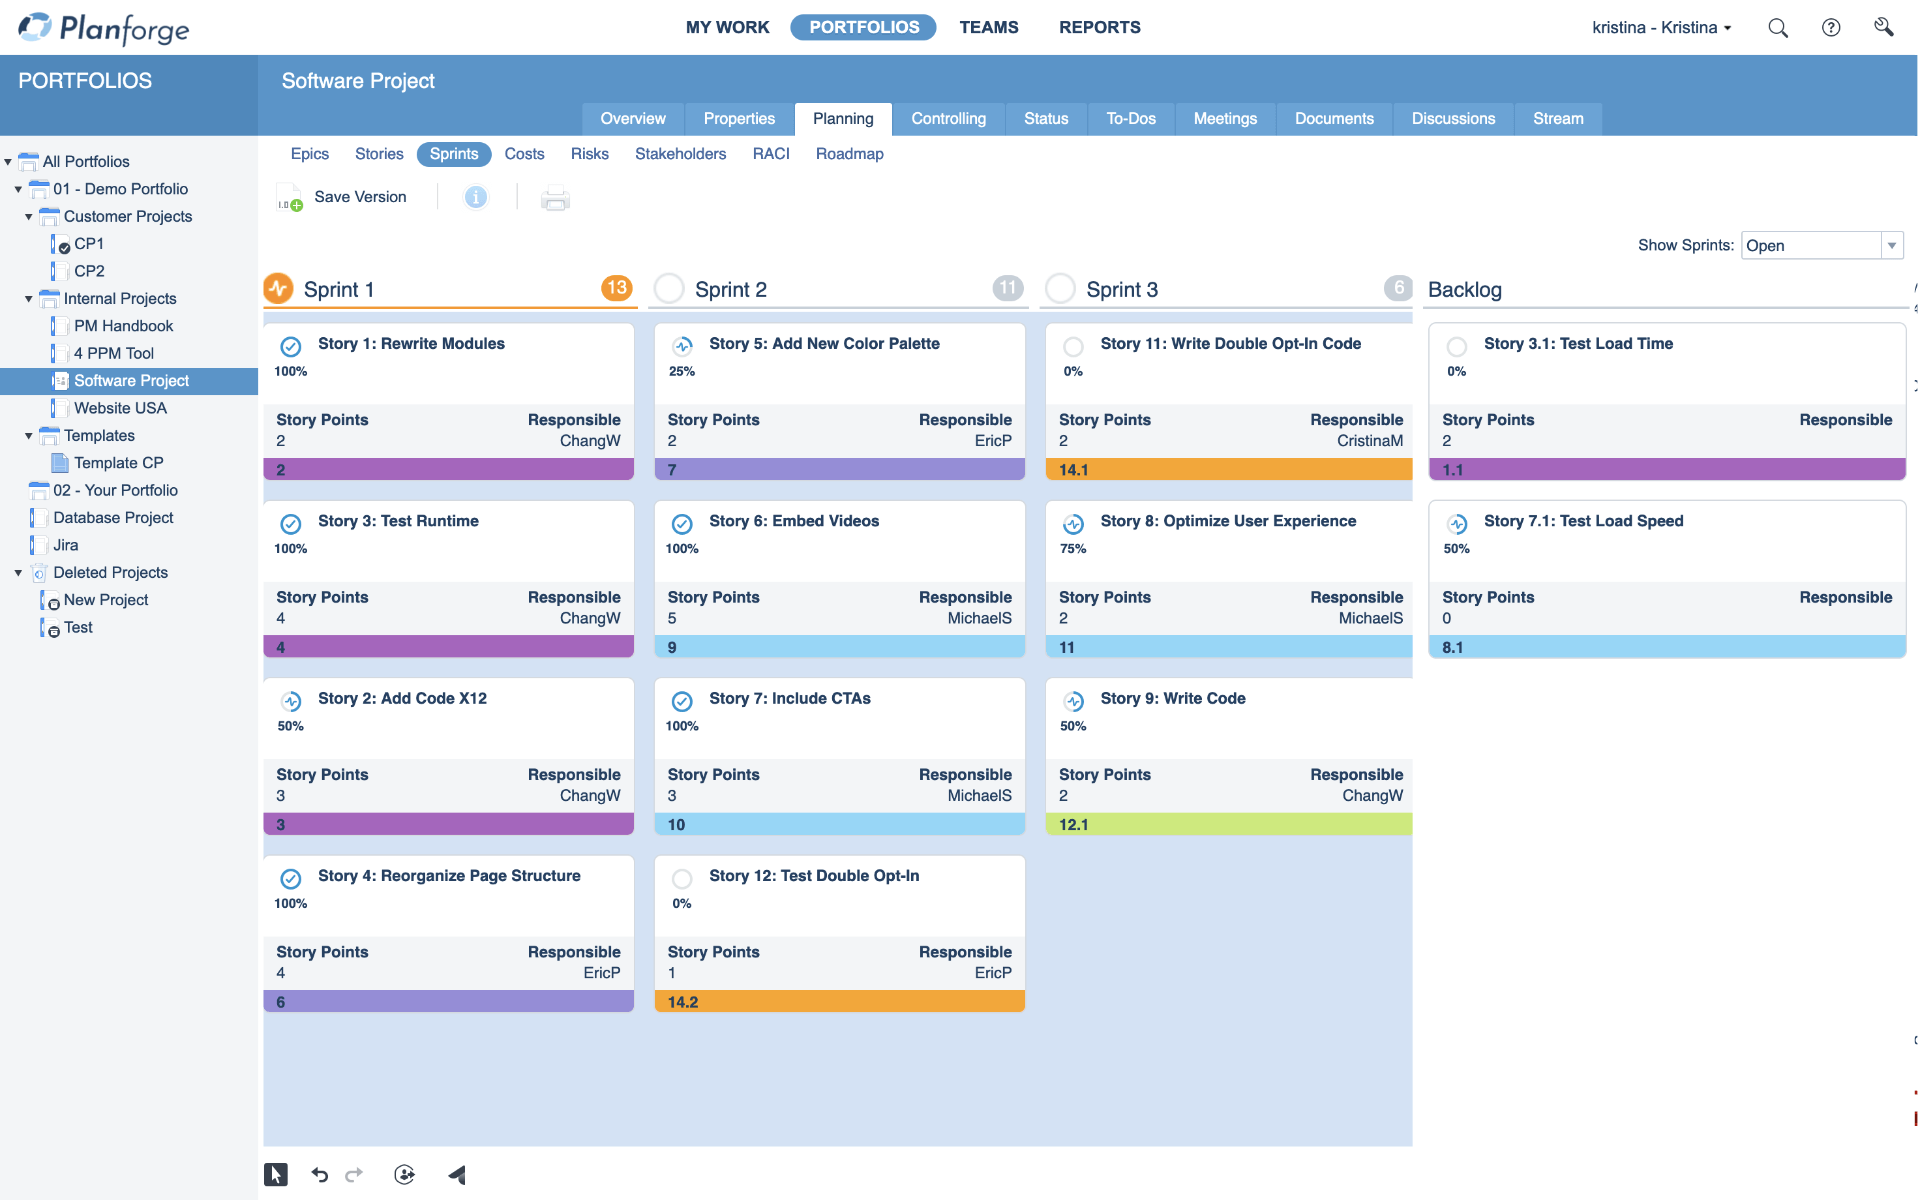 Iterative process sprint planning in project management software by Planforge